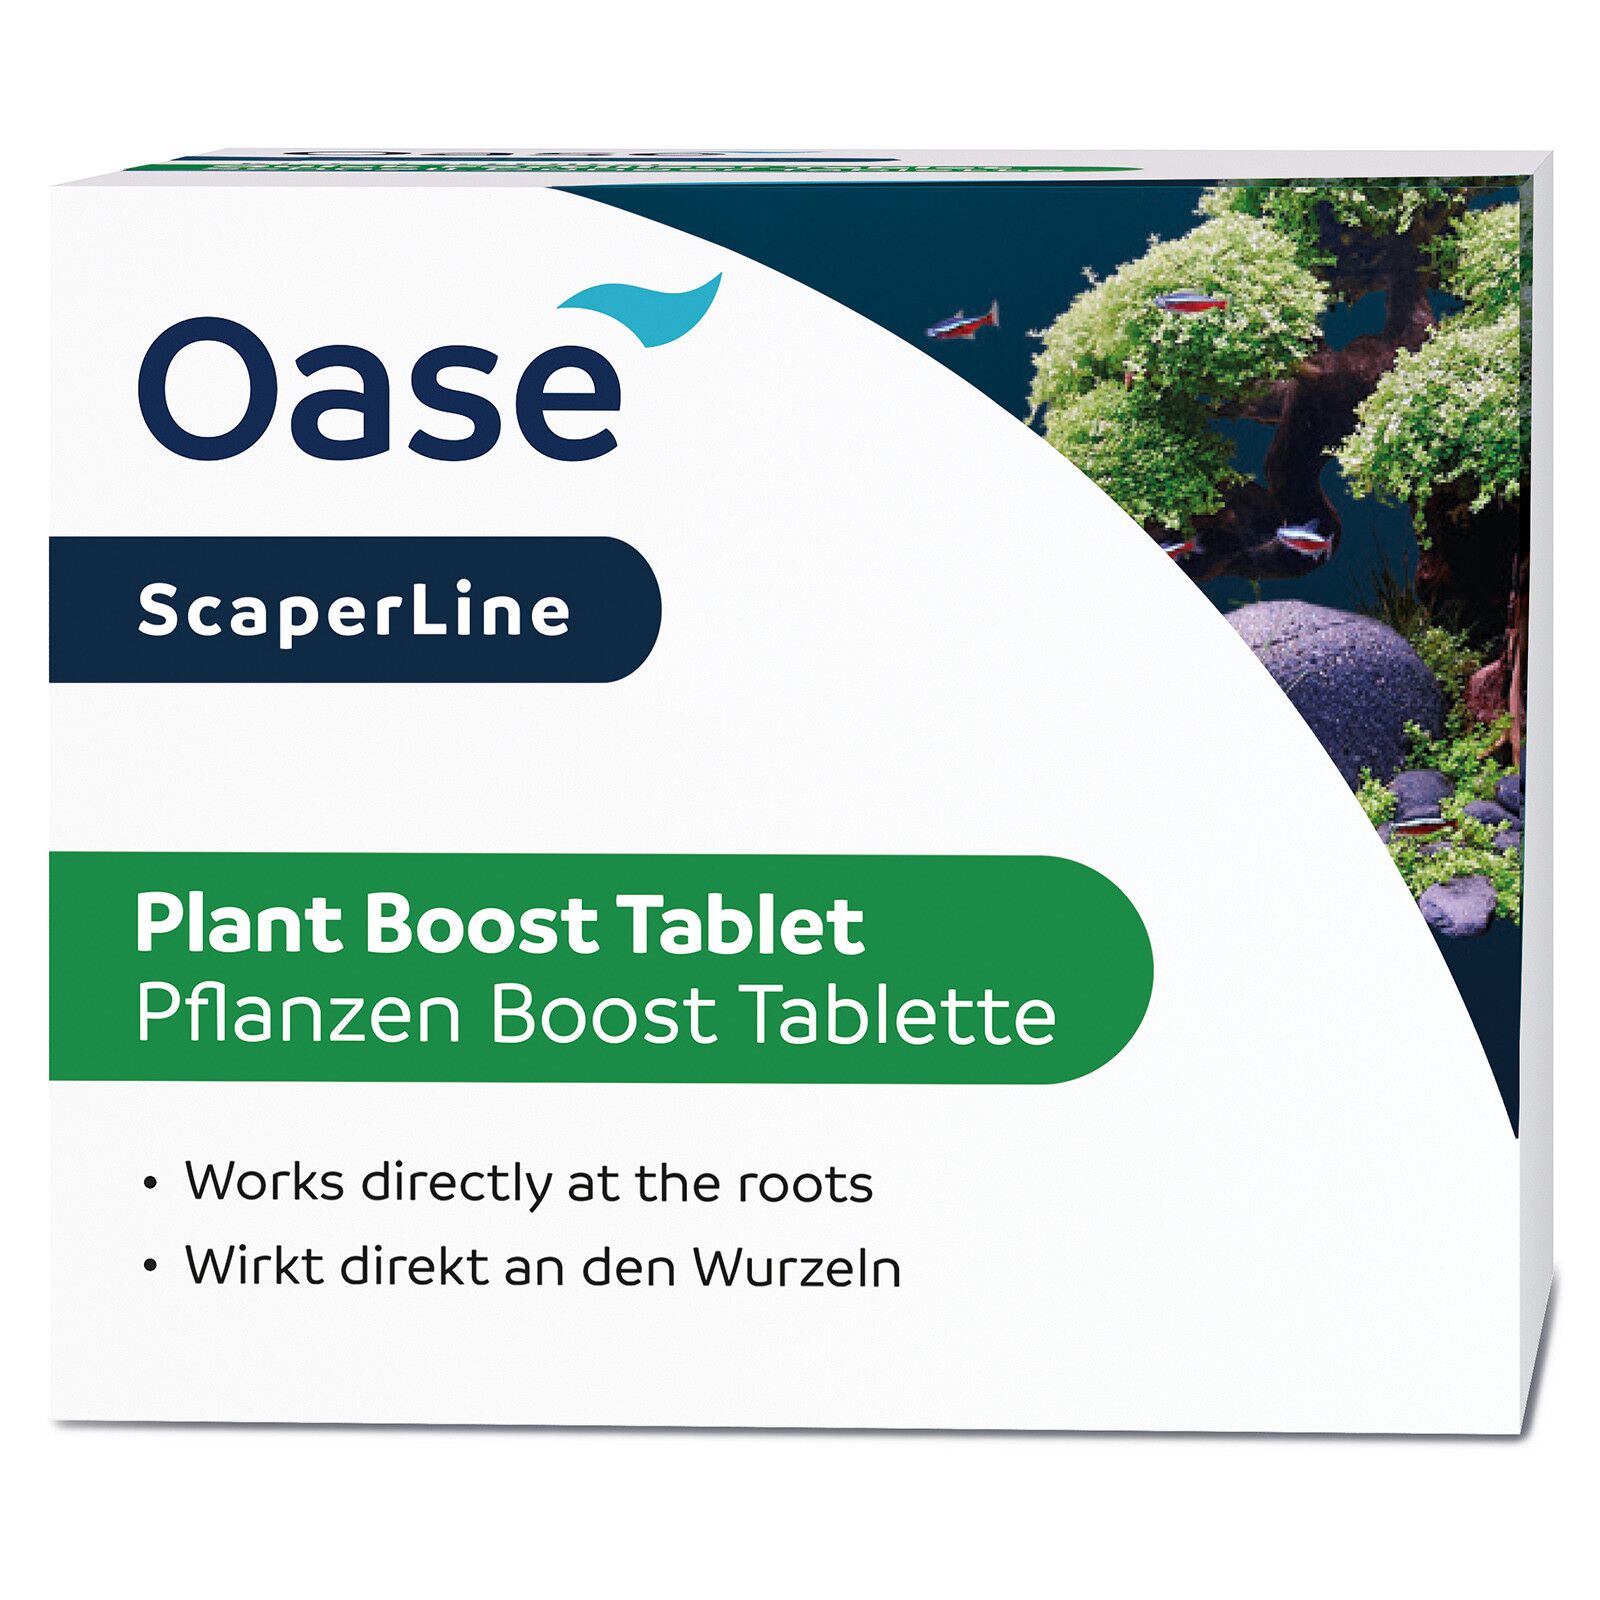 Oase - ScaperLine Plant Boost Tablets